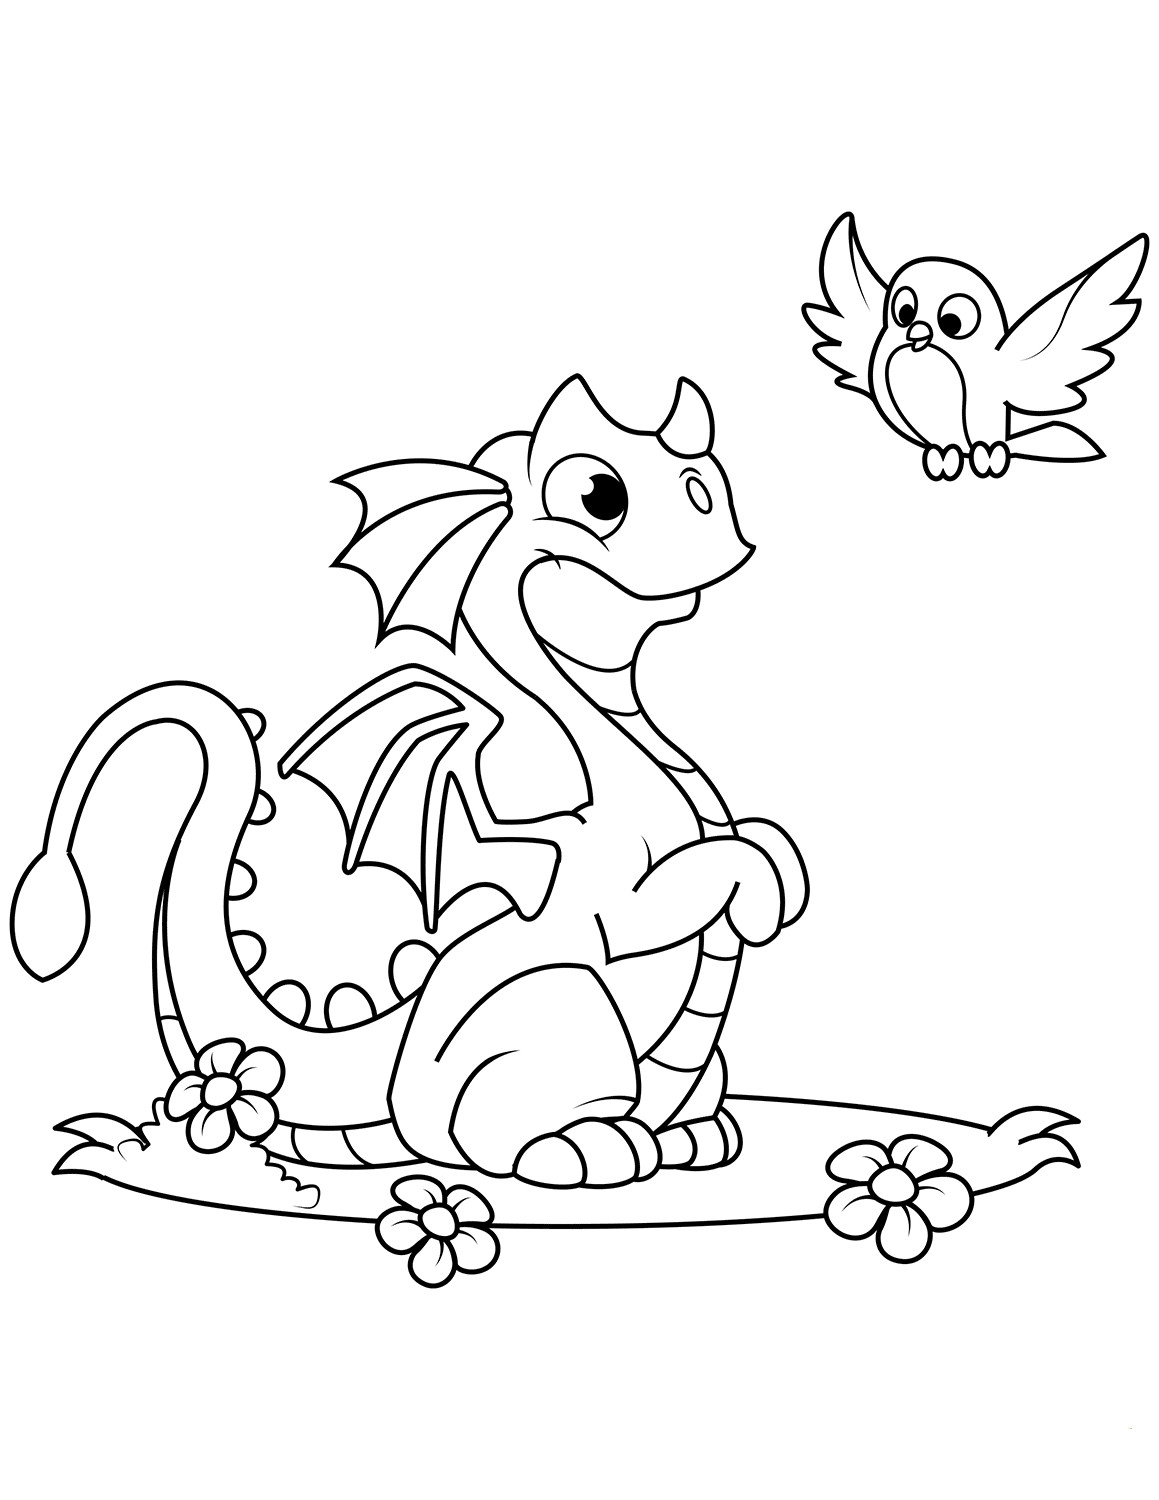 Baby Dragon Coloring Page
 35 Free Printable Dragon Coloring Pages